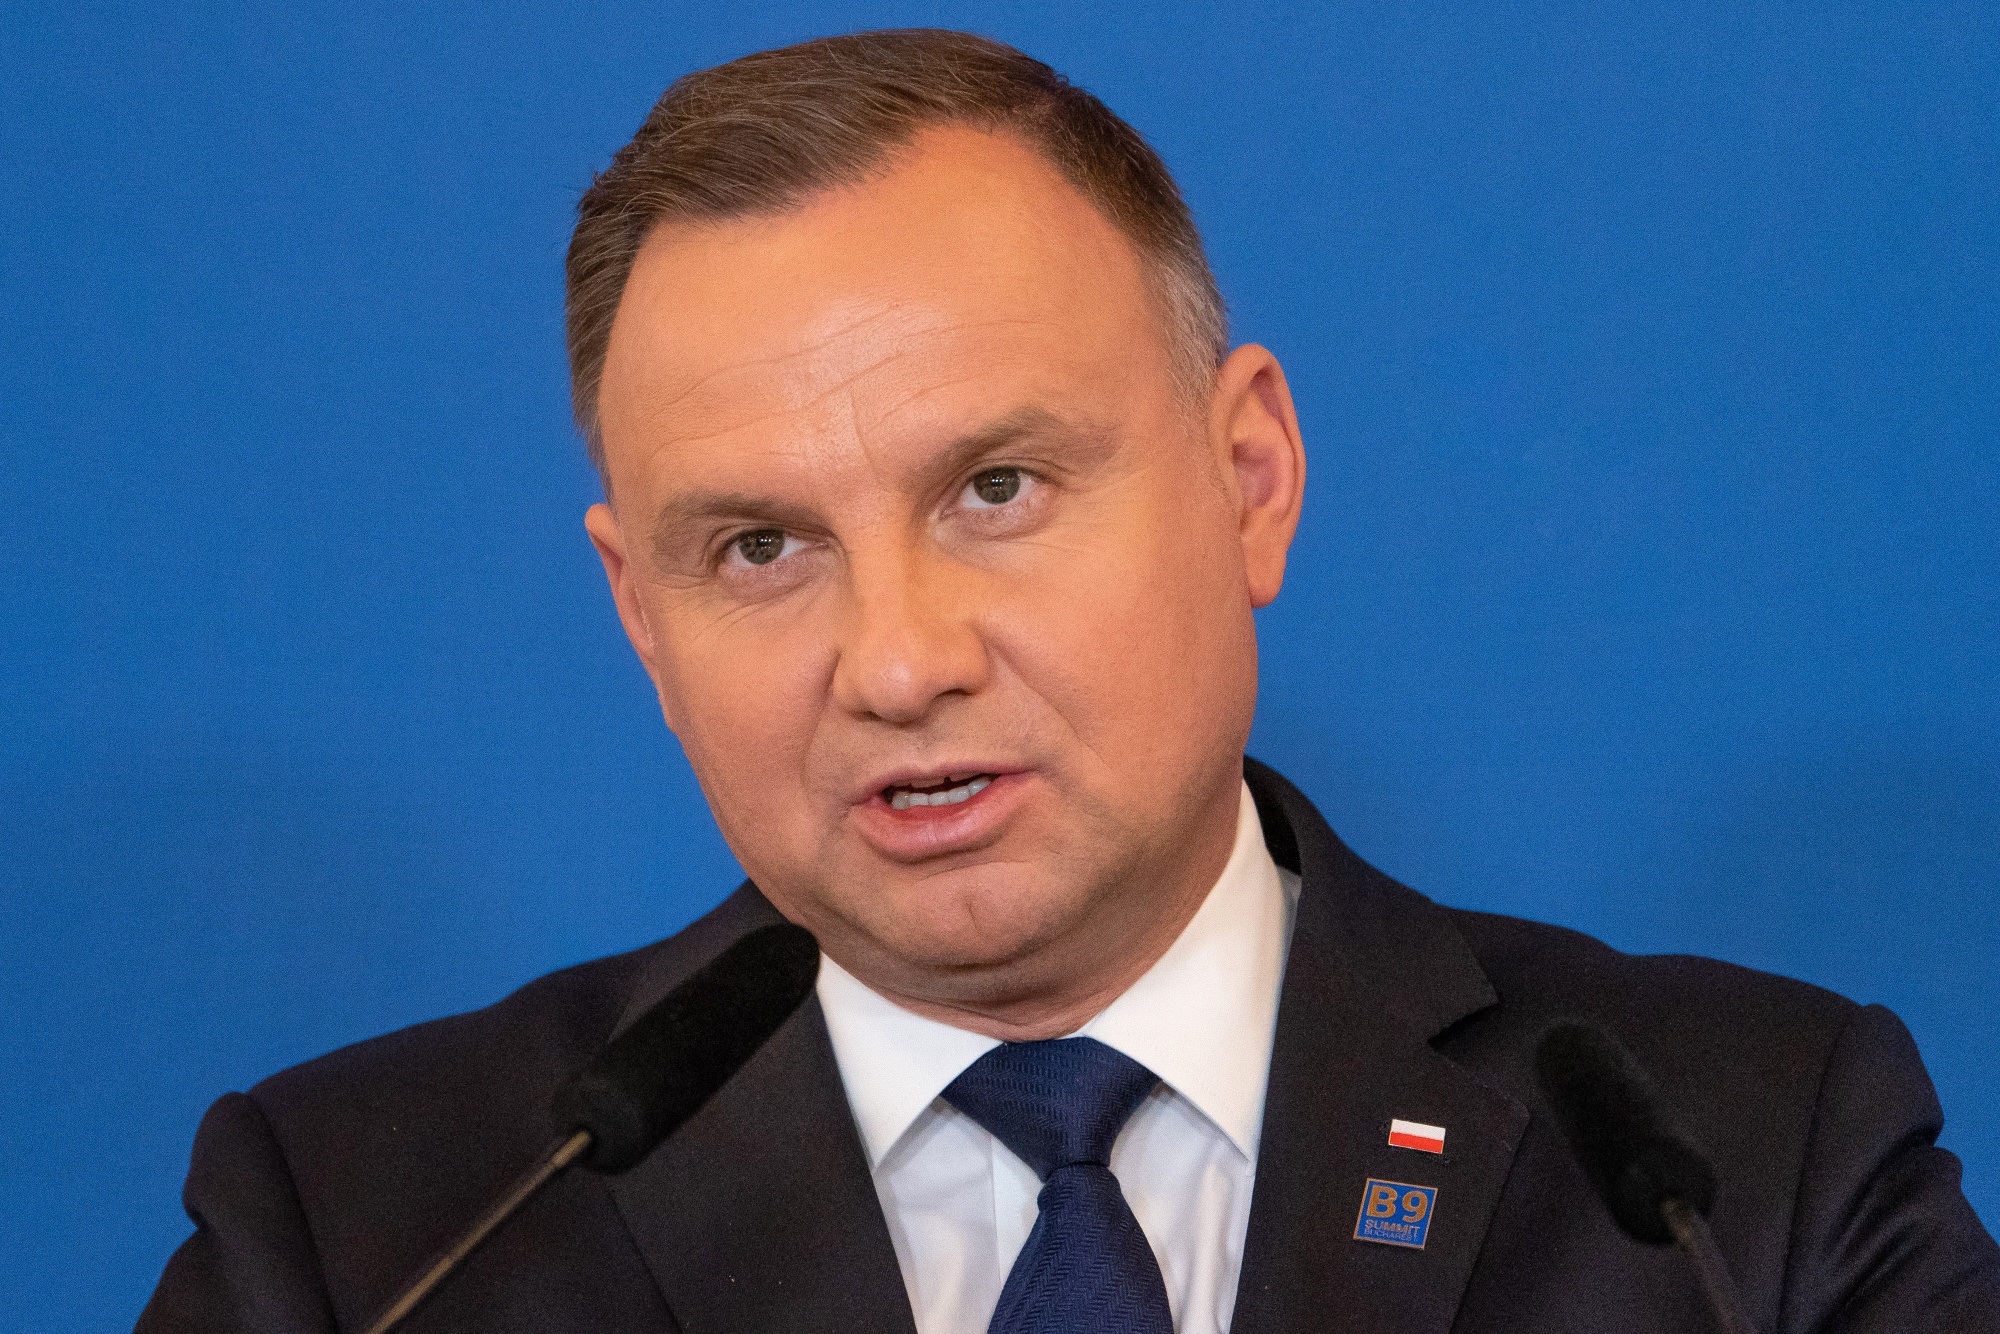 Polish president to meet party leaders for talks on forming government, Poland